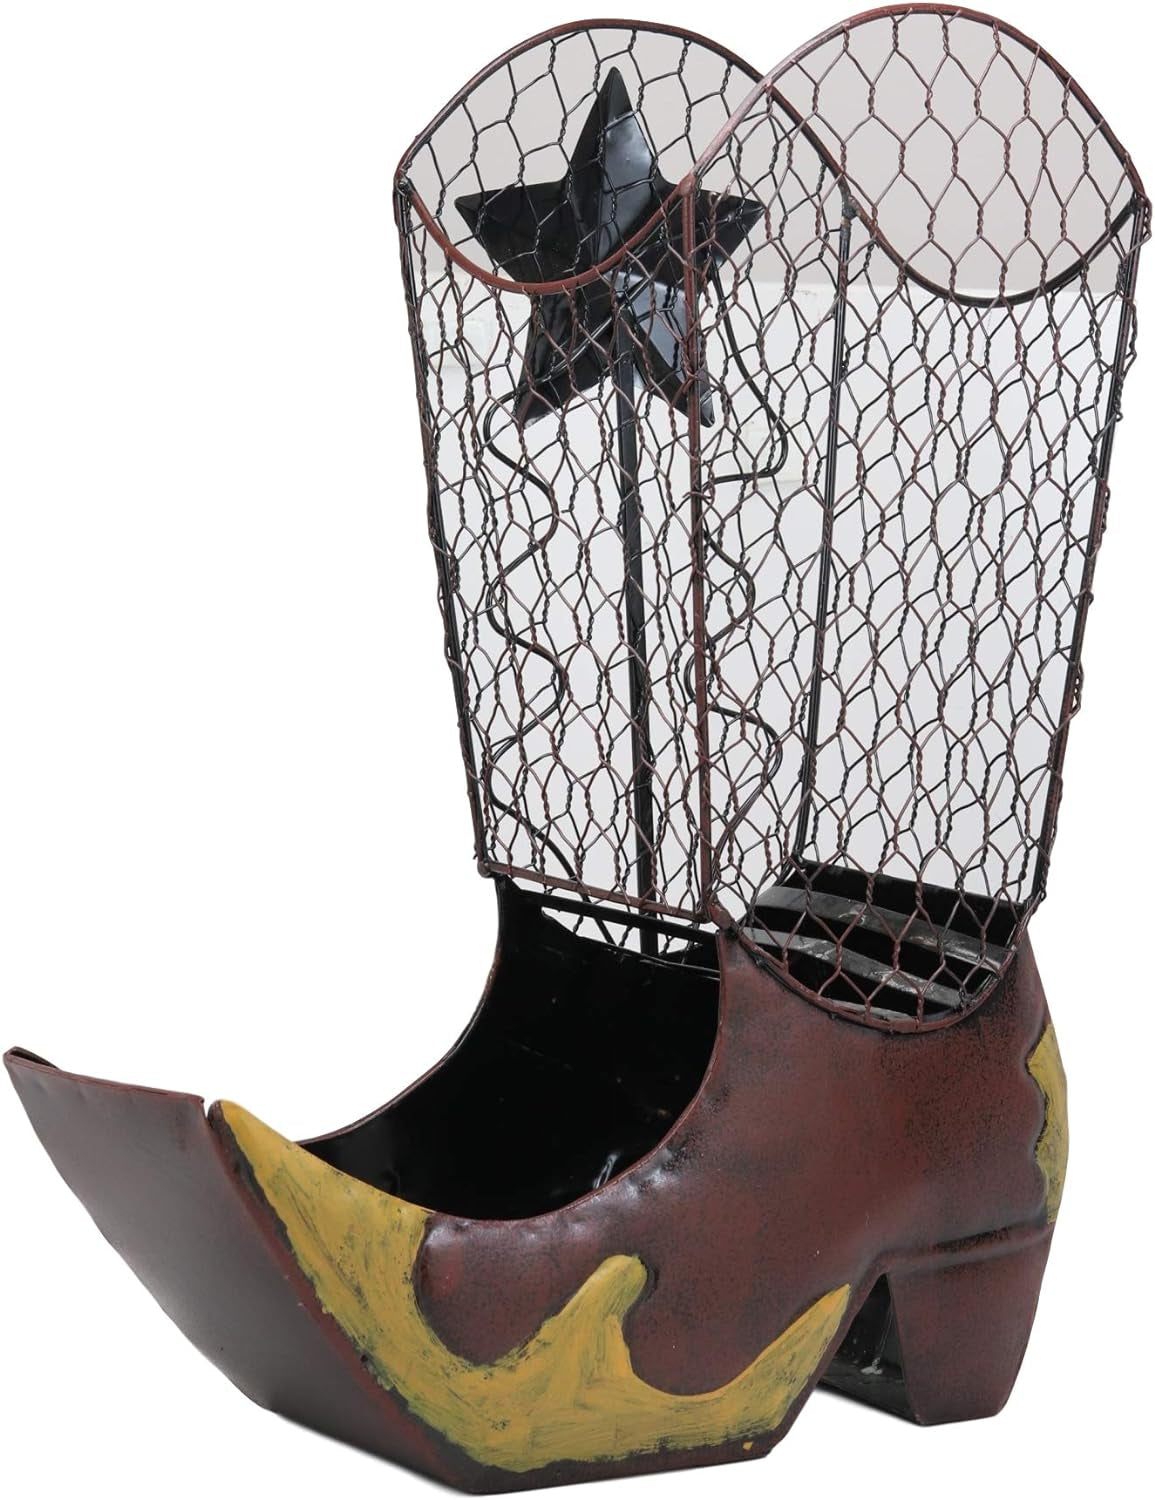 Western Rustic Cowboy Cowgirl Boot with Texas Star Decorative Cork and Wine Bottle Holder Sculpture 14" Tall Hand Made Steel Metal Animated Decor Figurine Kitchen Wine Cellar Organizer